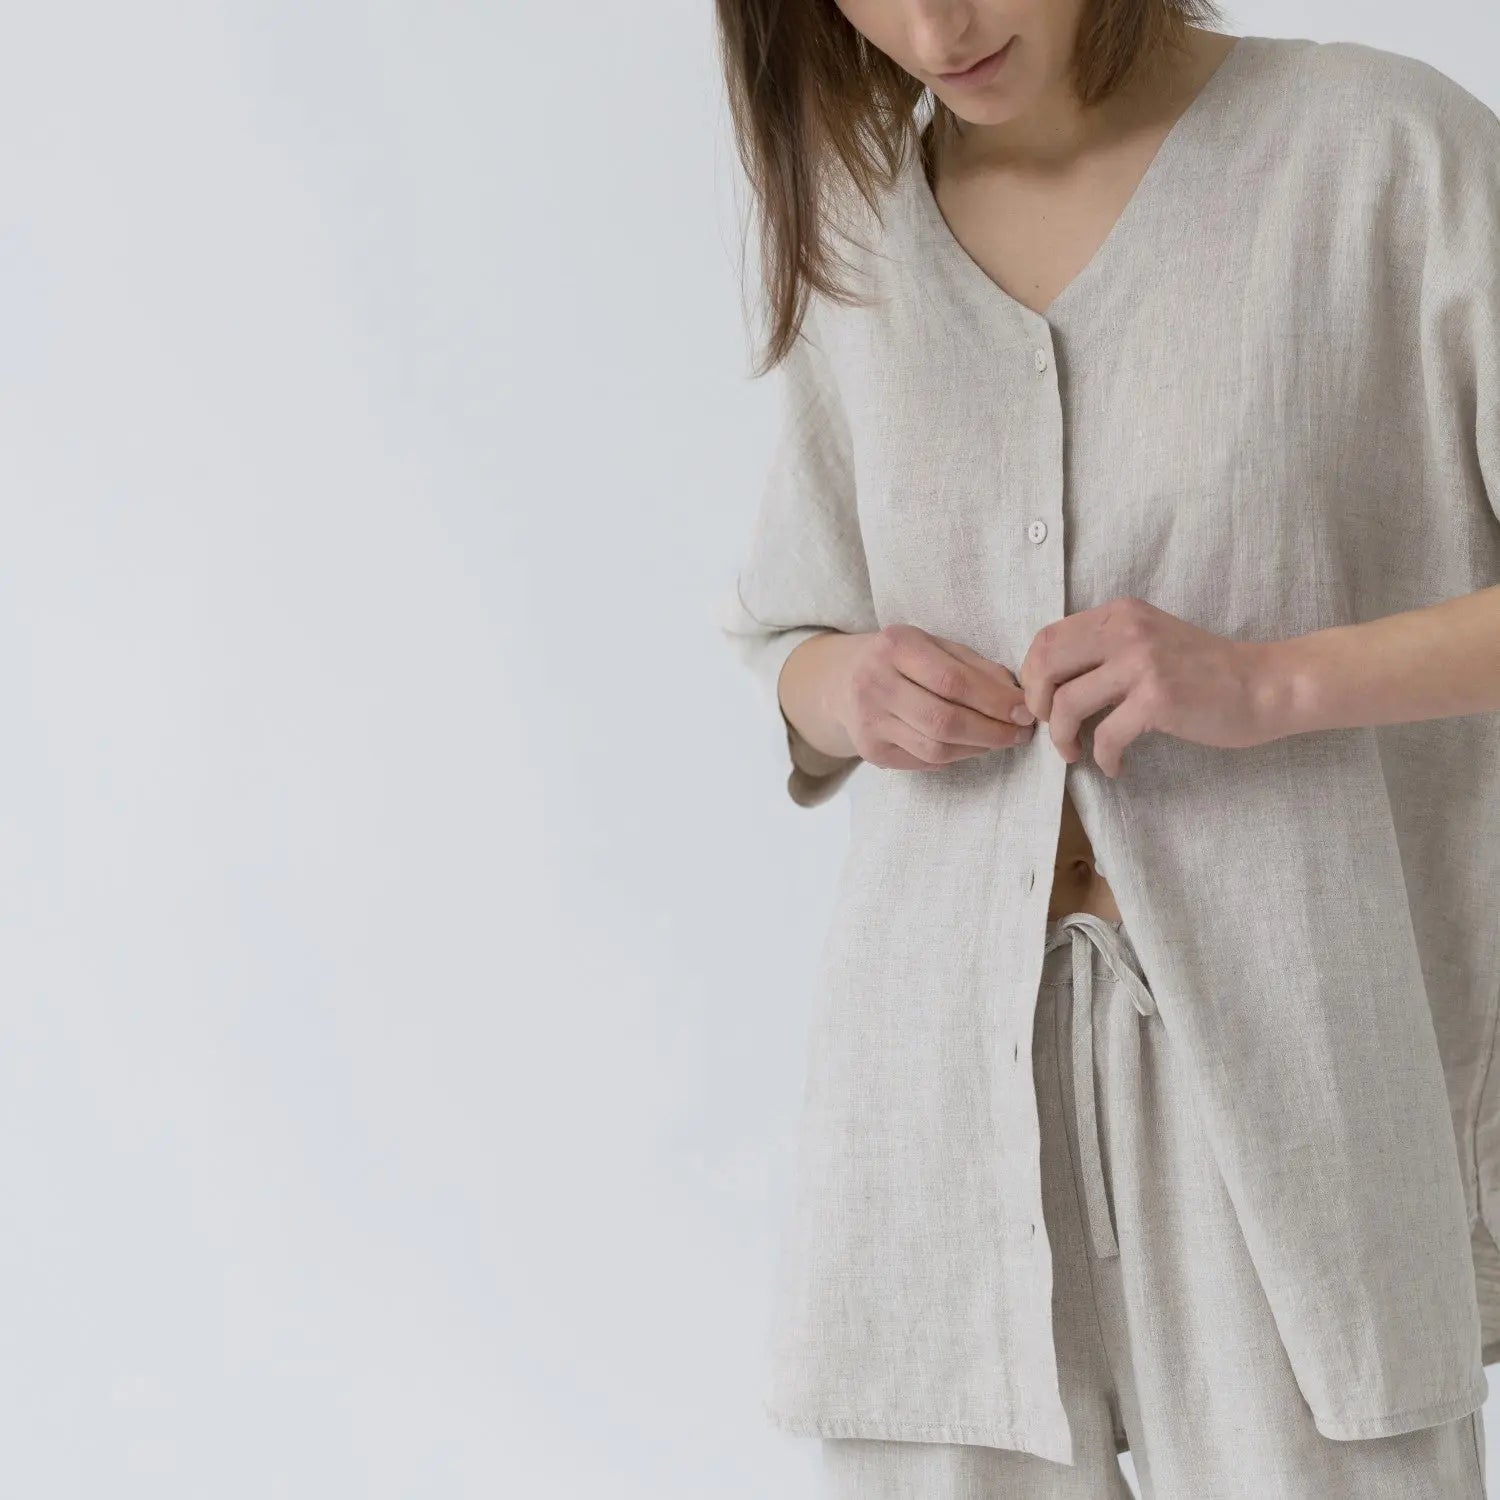 A woman buttoning a linen Primrose loungewear set, featuring a V-neck top with buttoned front closure and 3/4-length sleeves, paired with relaxed-fit trousers and a matching linen bag.